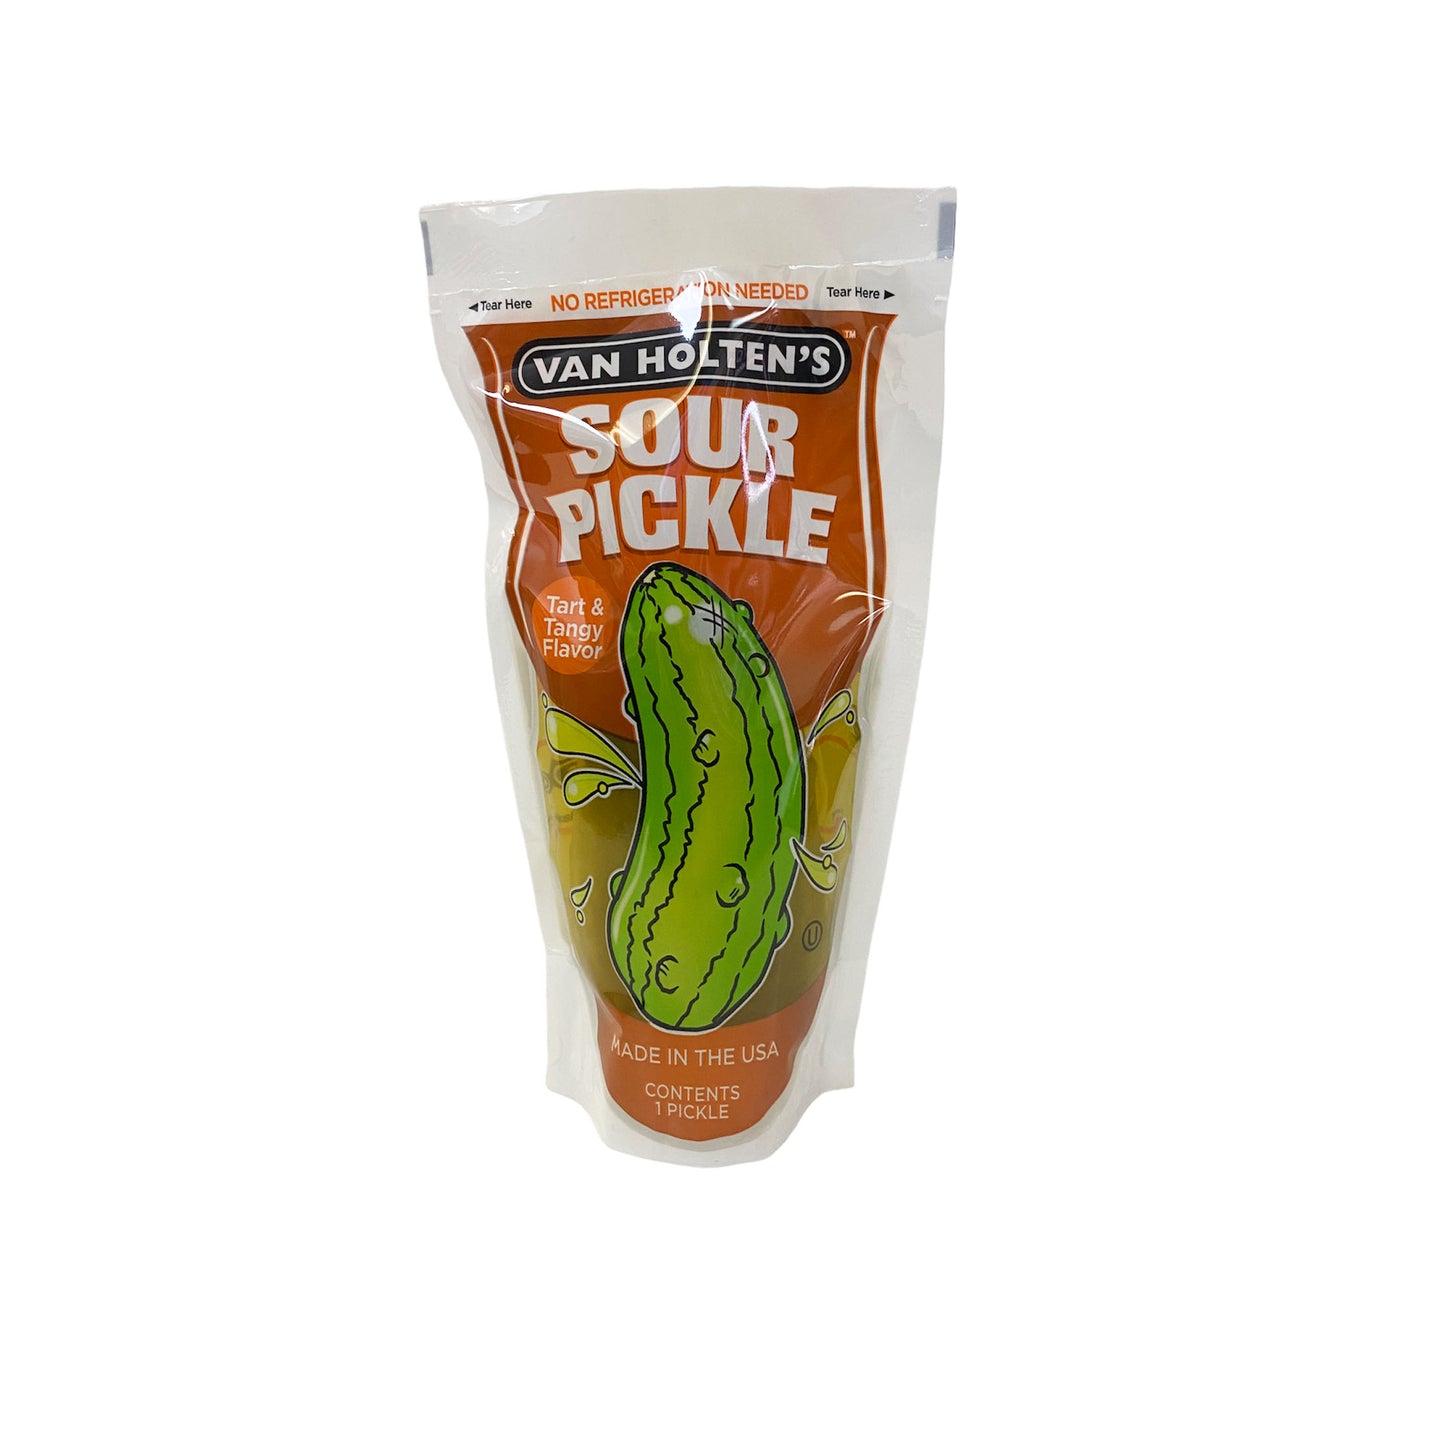 Van Holten's Pickle-In-A-Pouch Sour Pickle